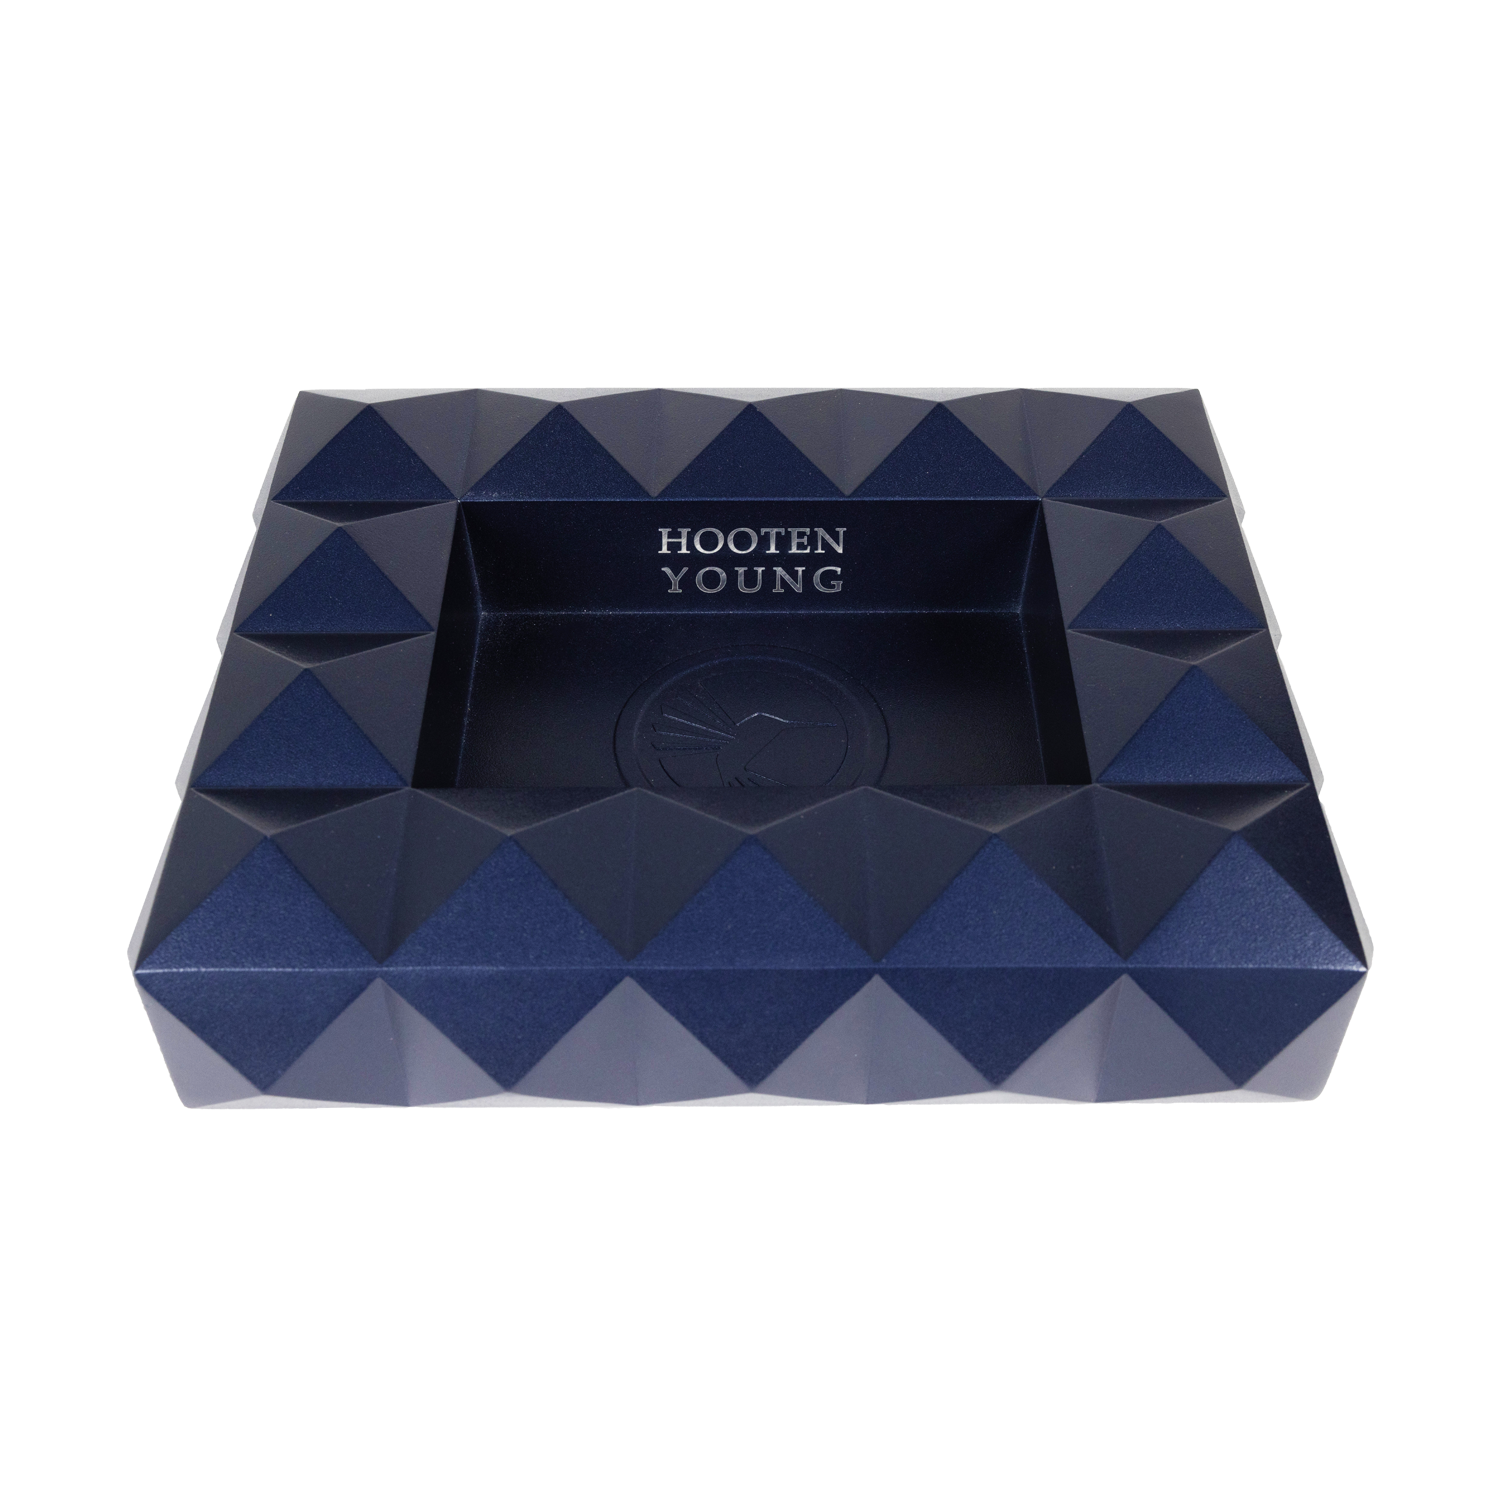 front view of Blue Quasar Ashtray showing "HOOTEN YOUNG" text